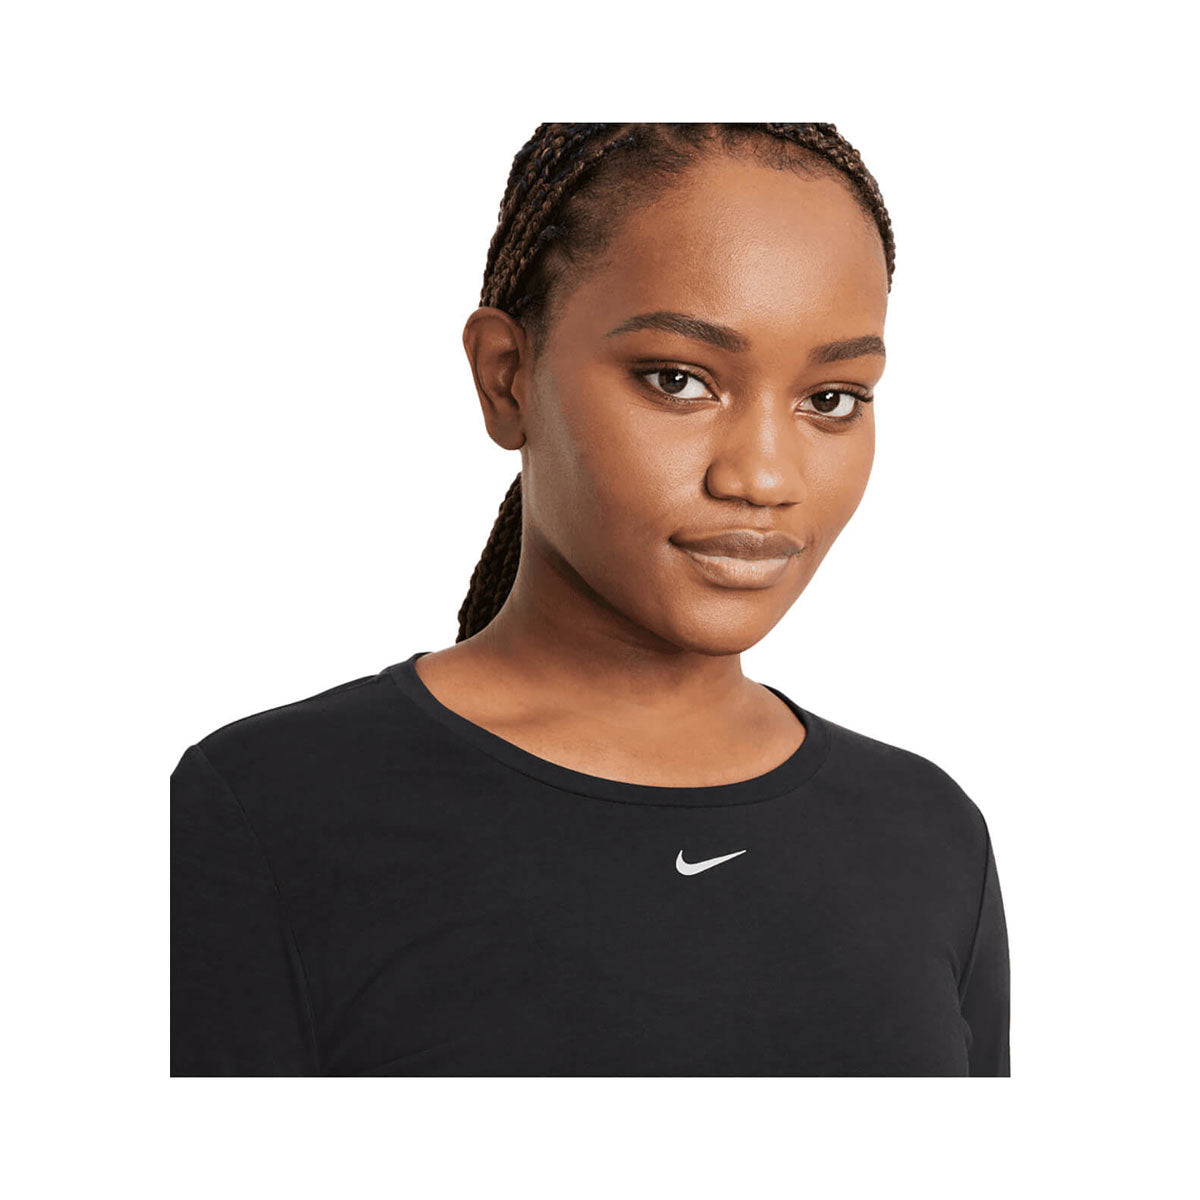 Nike Women's Dri-FIT UV One Luxe Fit Long-Sleeve Top - KickzStore